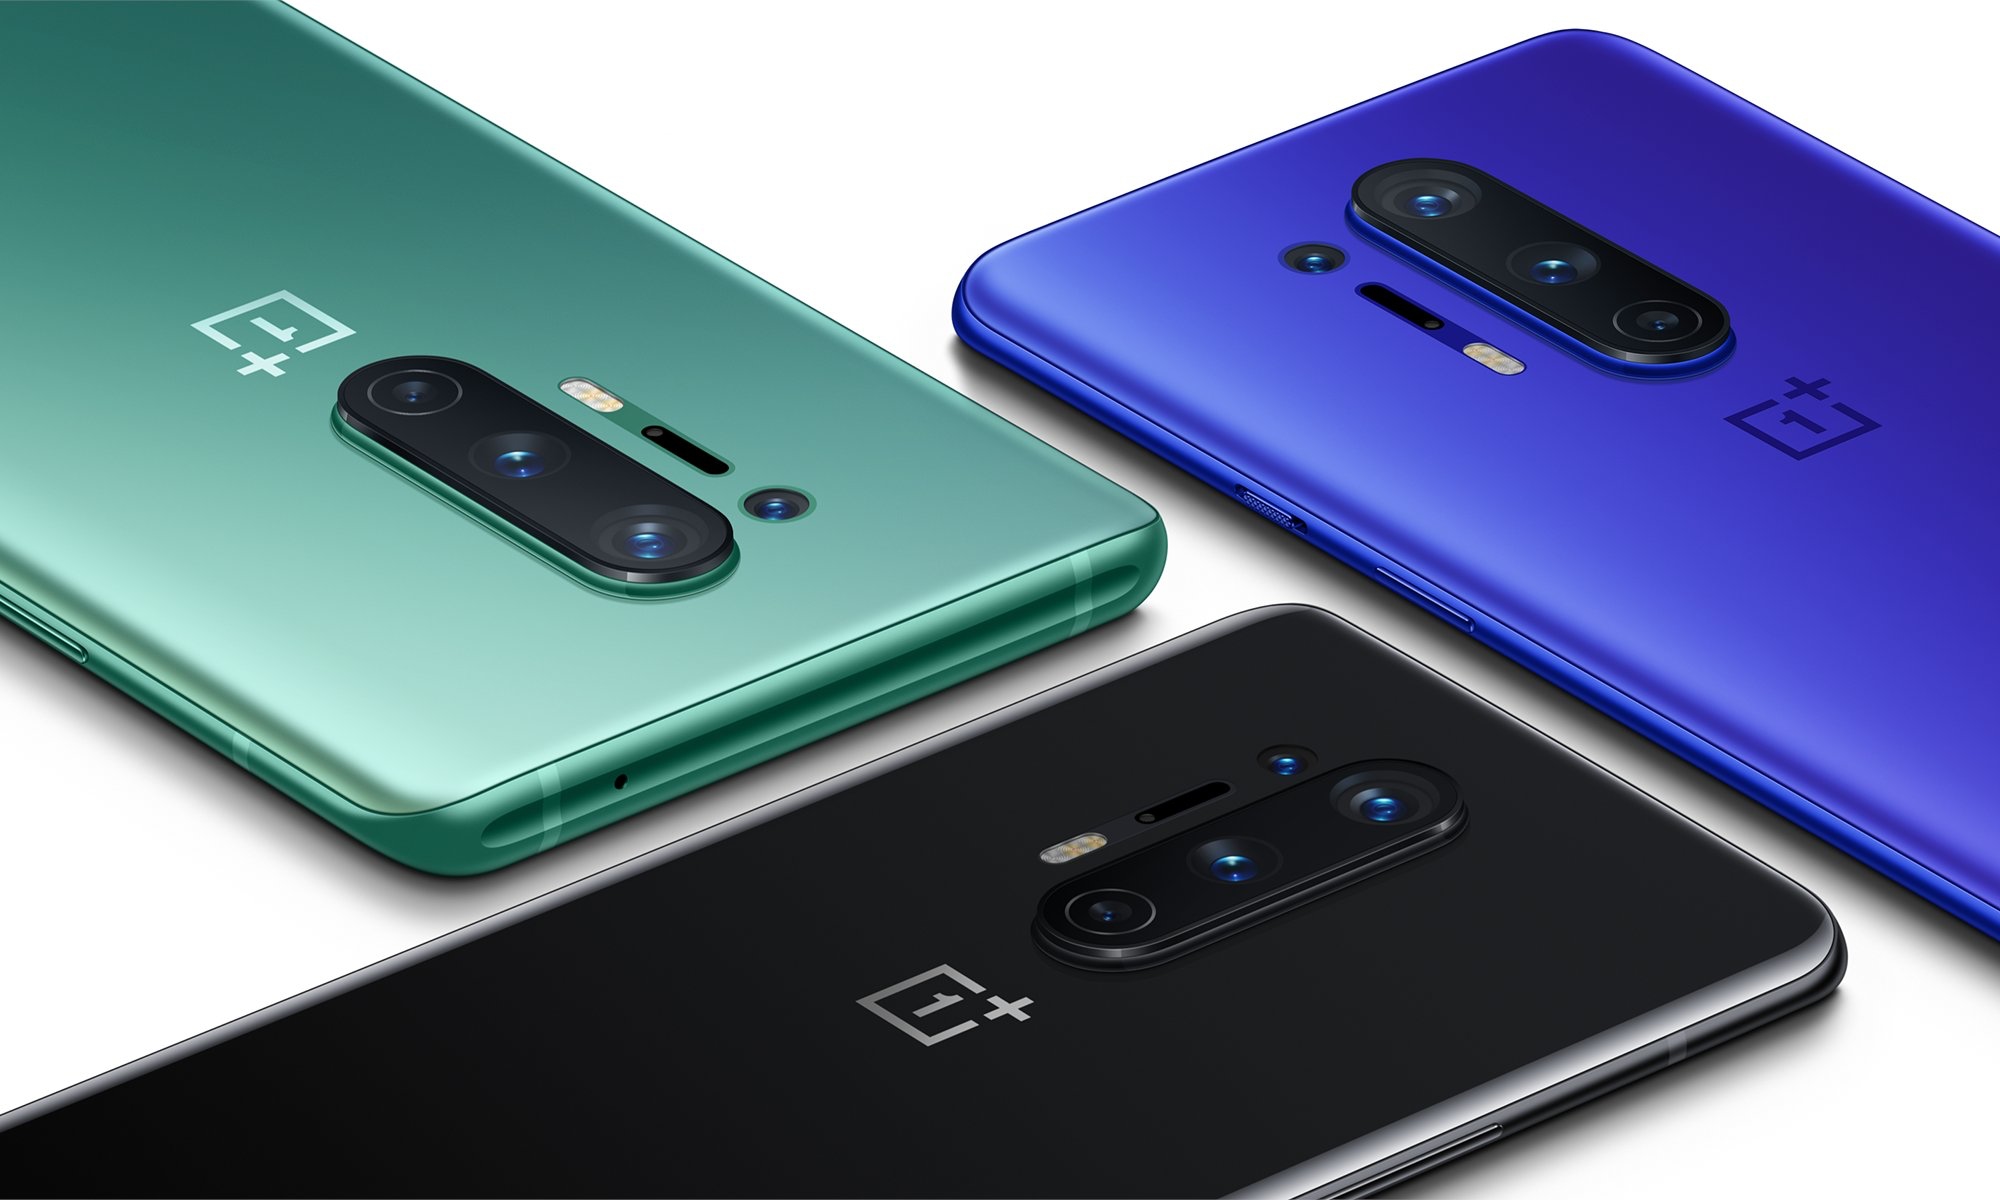 OnePlus 8, OnePlus 8 Pro and OnePlus 9R have started receiving Google's August security update